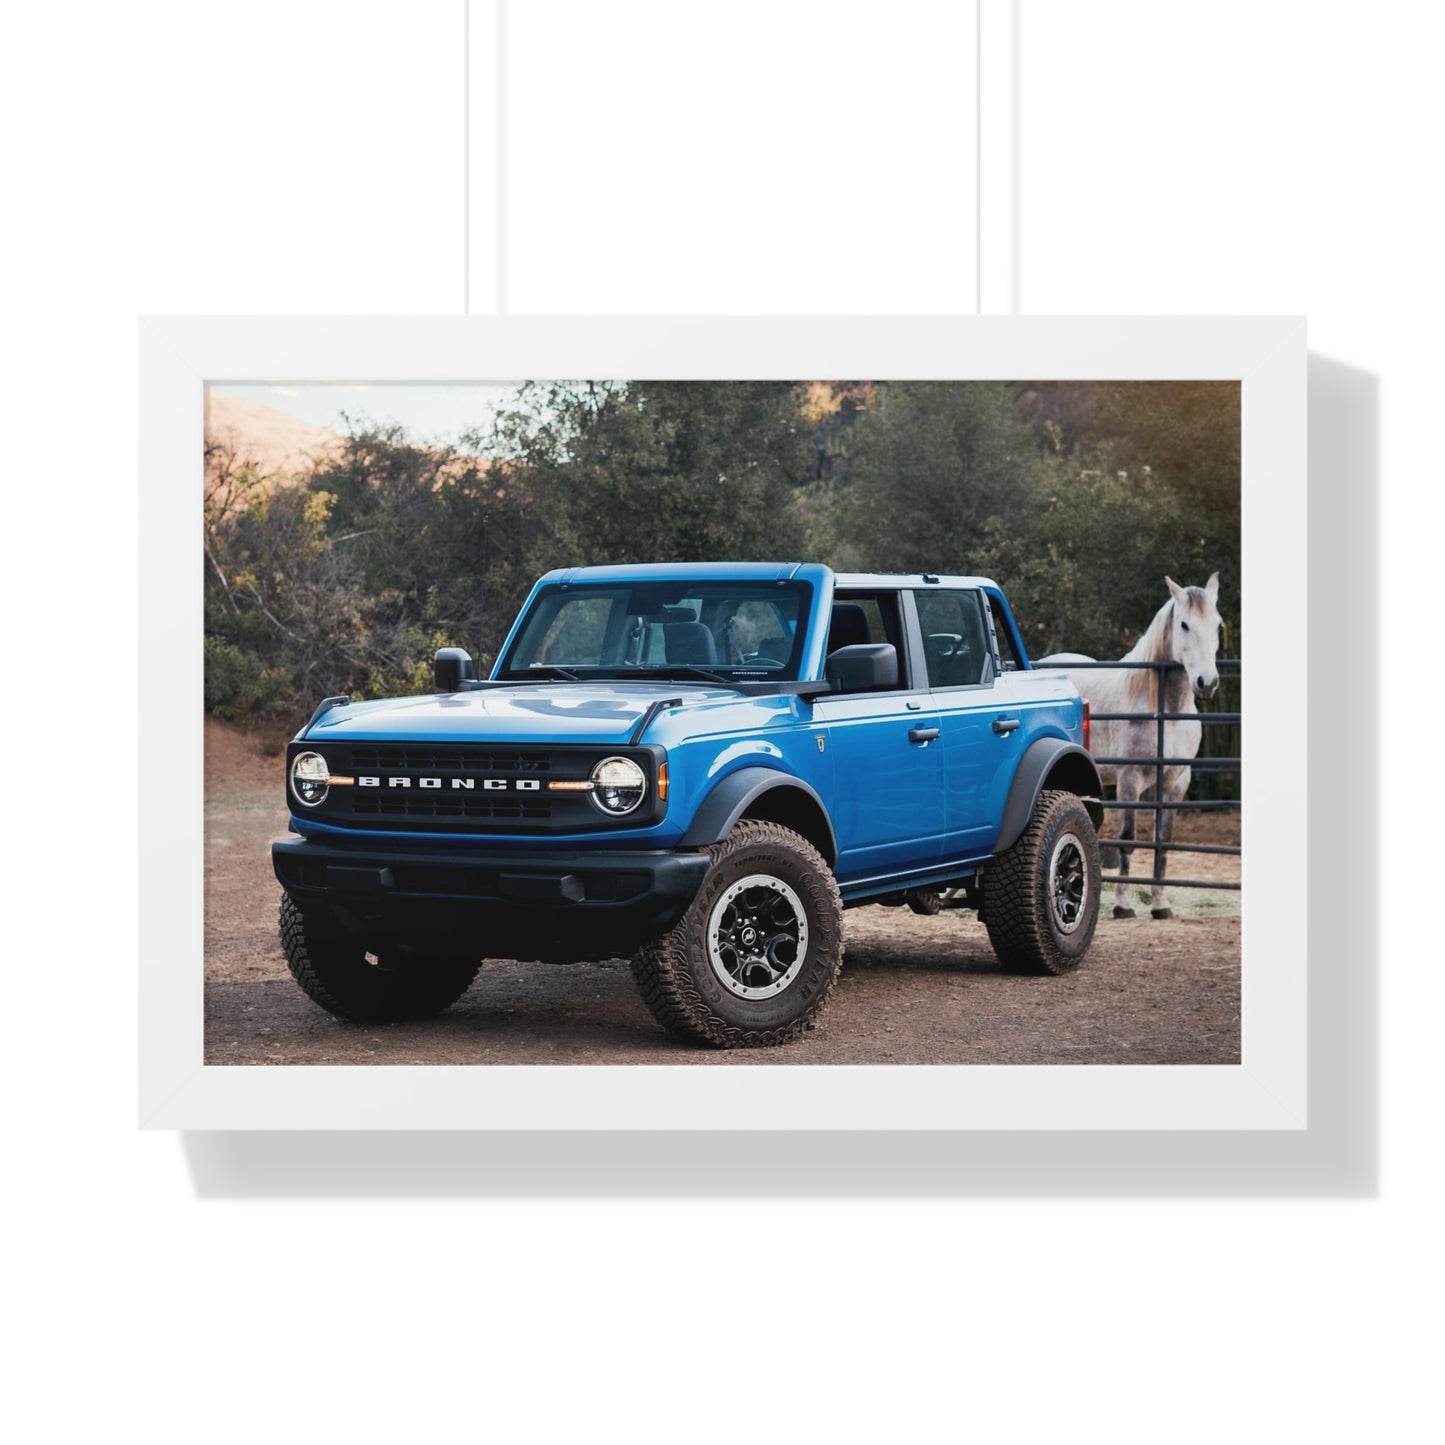 "The Workhorse" 24" x 16" Framed Ford Bronco Poster